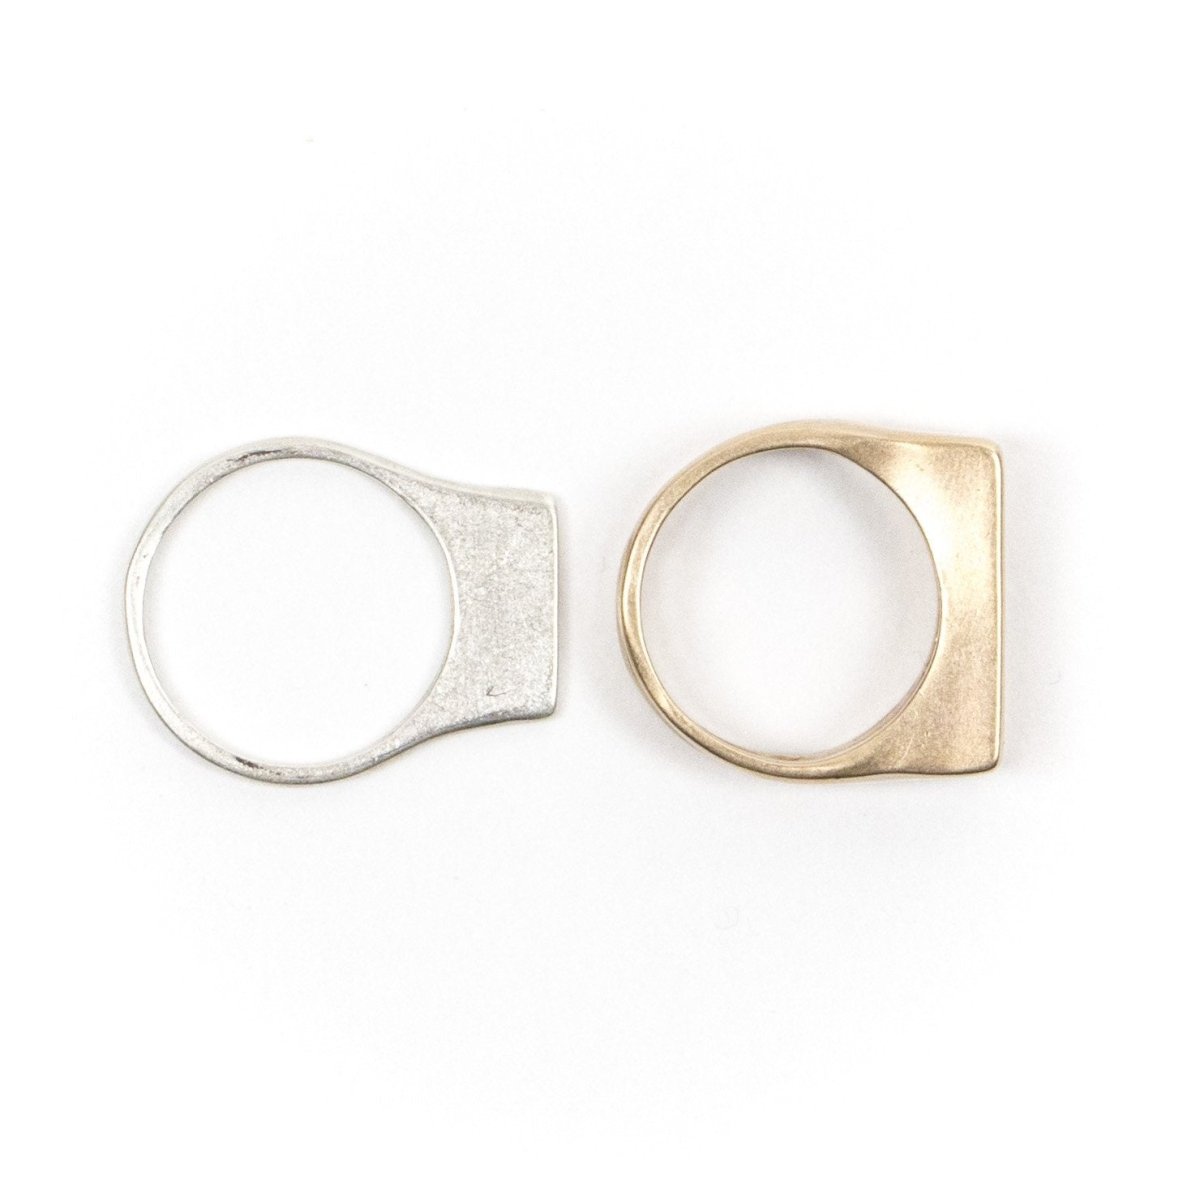 A cast-silver betsy & iya Tuyo ring and a cast-bronze betsy & iya Mía ring, pictured side by side. Hand-crafted in Portland, Oregon.